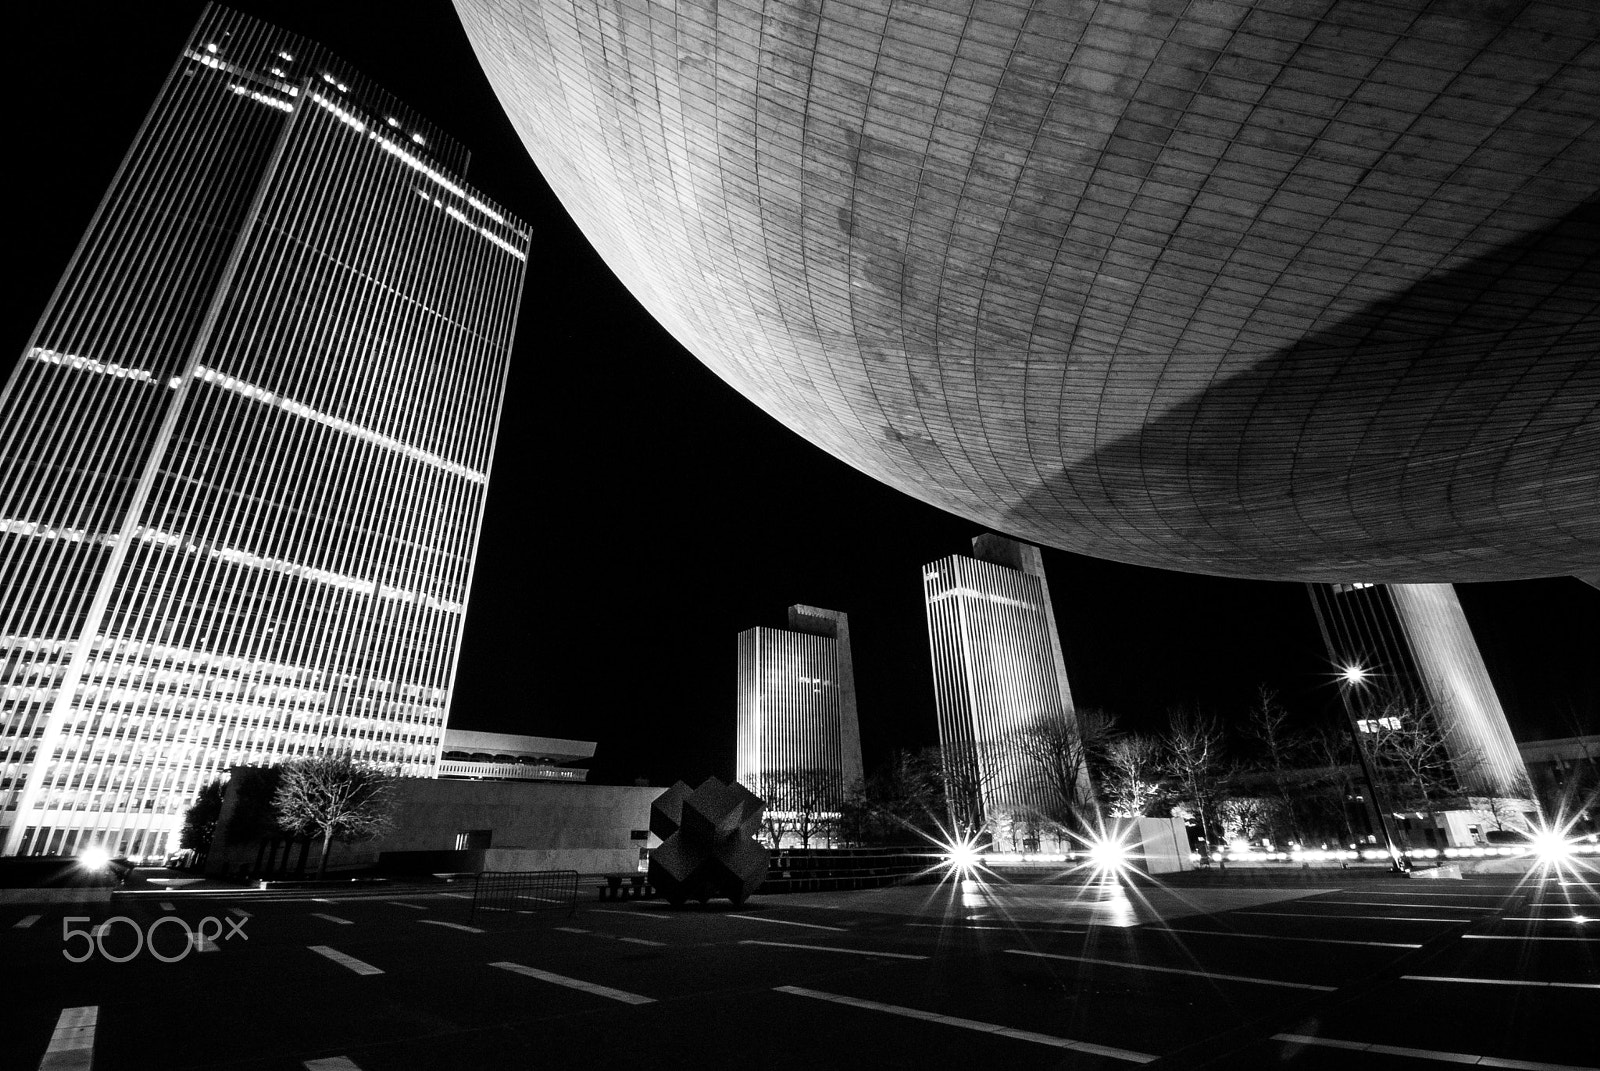 Nikon D80 + Tamron SP AF 10-24mm F3.5-4.5 Di II LD Aspherical (IF) sample photo. The empire state plaza photography